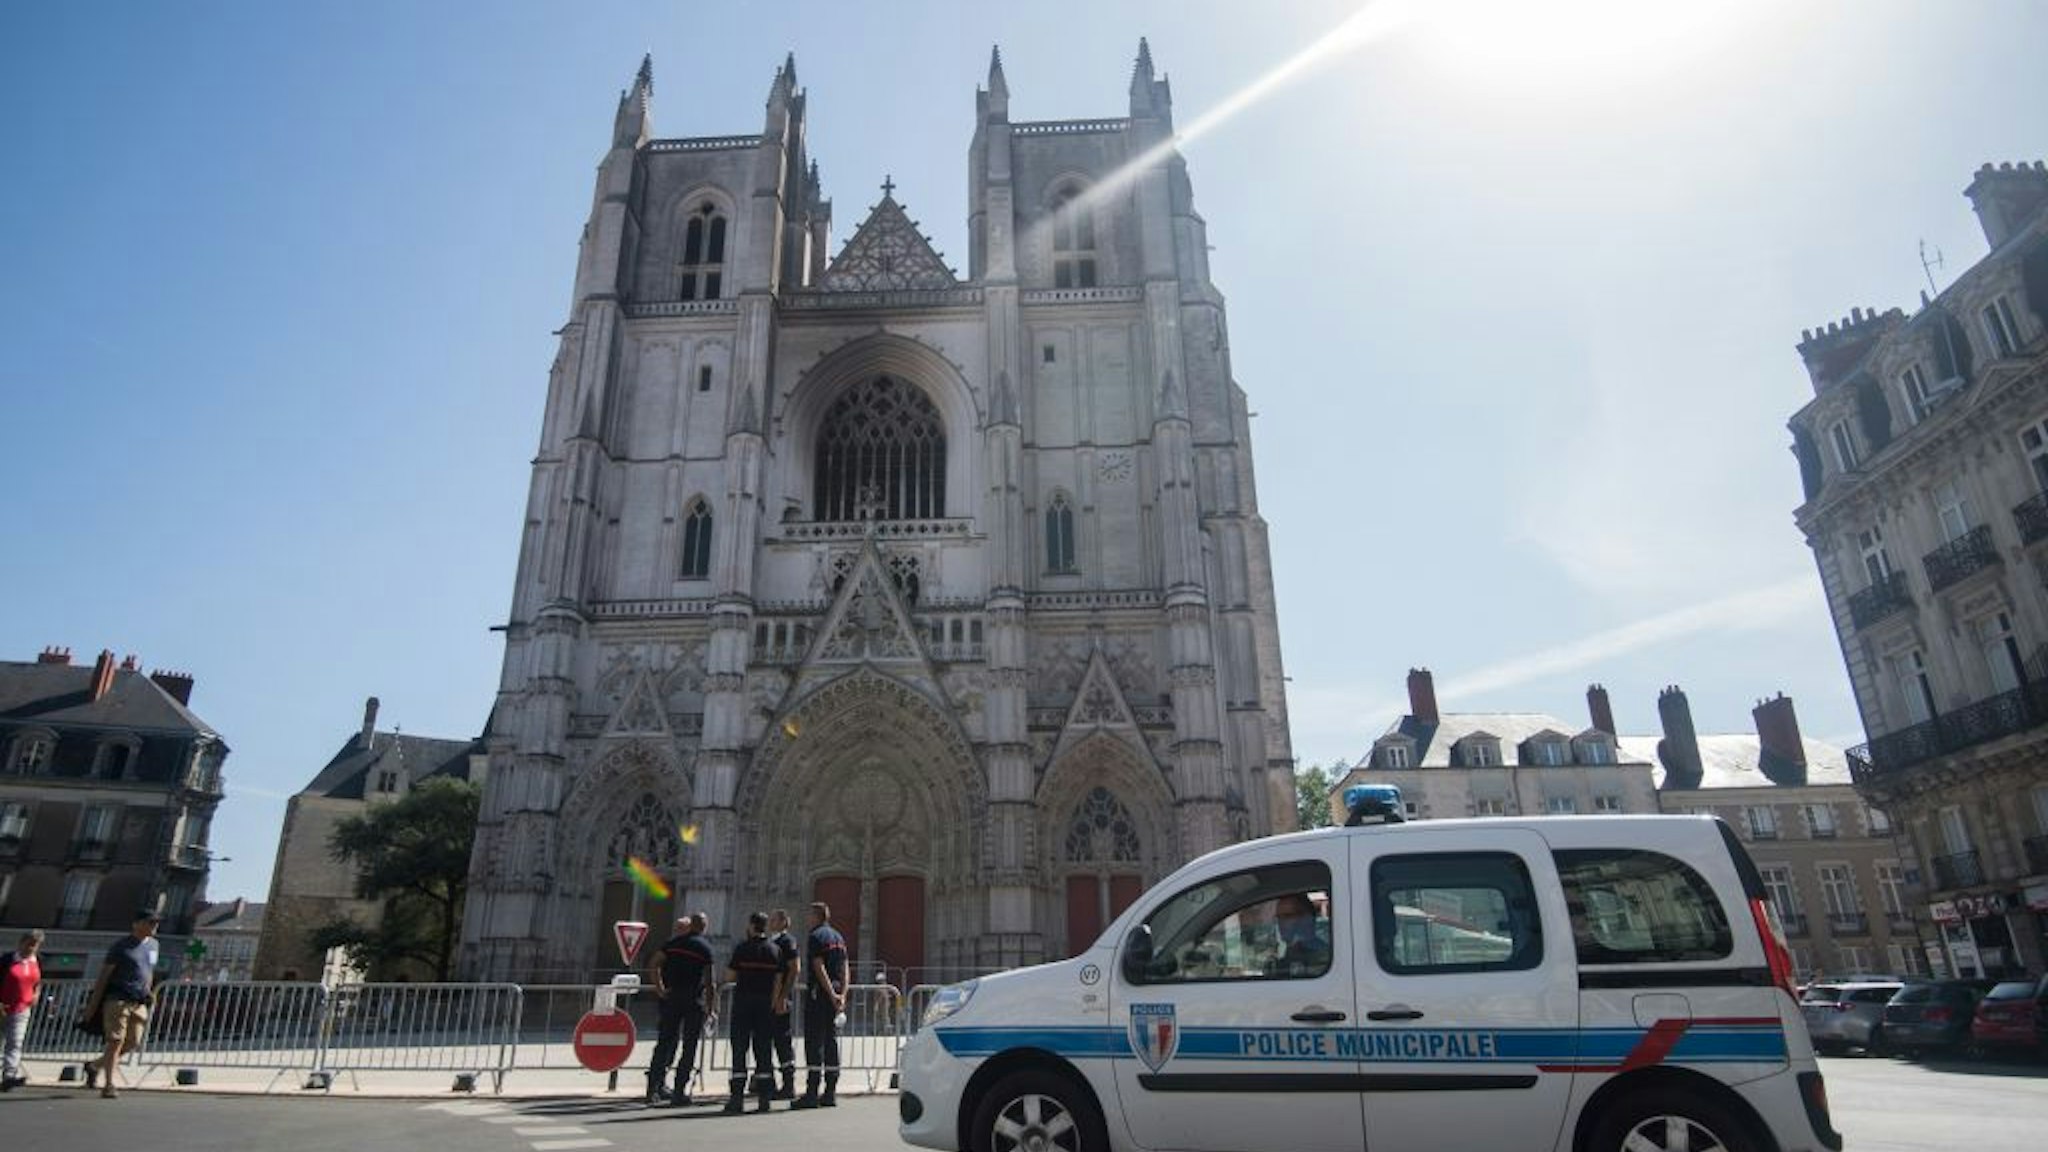 Firefighters stand in front of Saint-Pierre-et-Saint-Paul cathedral in Nantes, western France, on July 20, 2020, two days after a fire broke out in three places at the gothic cathedral of Nantes in western France, destroying stained glass windows and the grand organ and sparking an arson investigation. (Photo by Loic VENANCE / AFP) (Photo by LOIC VENANCE/AFP via Getty Images)